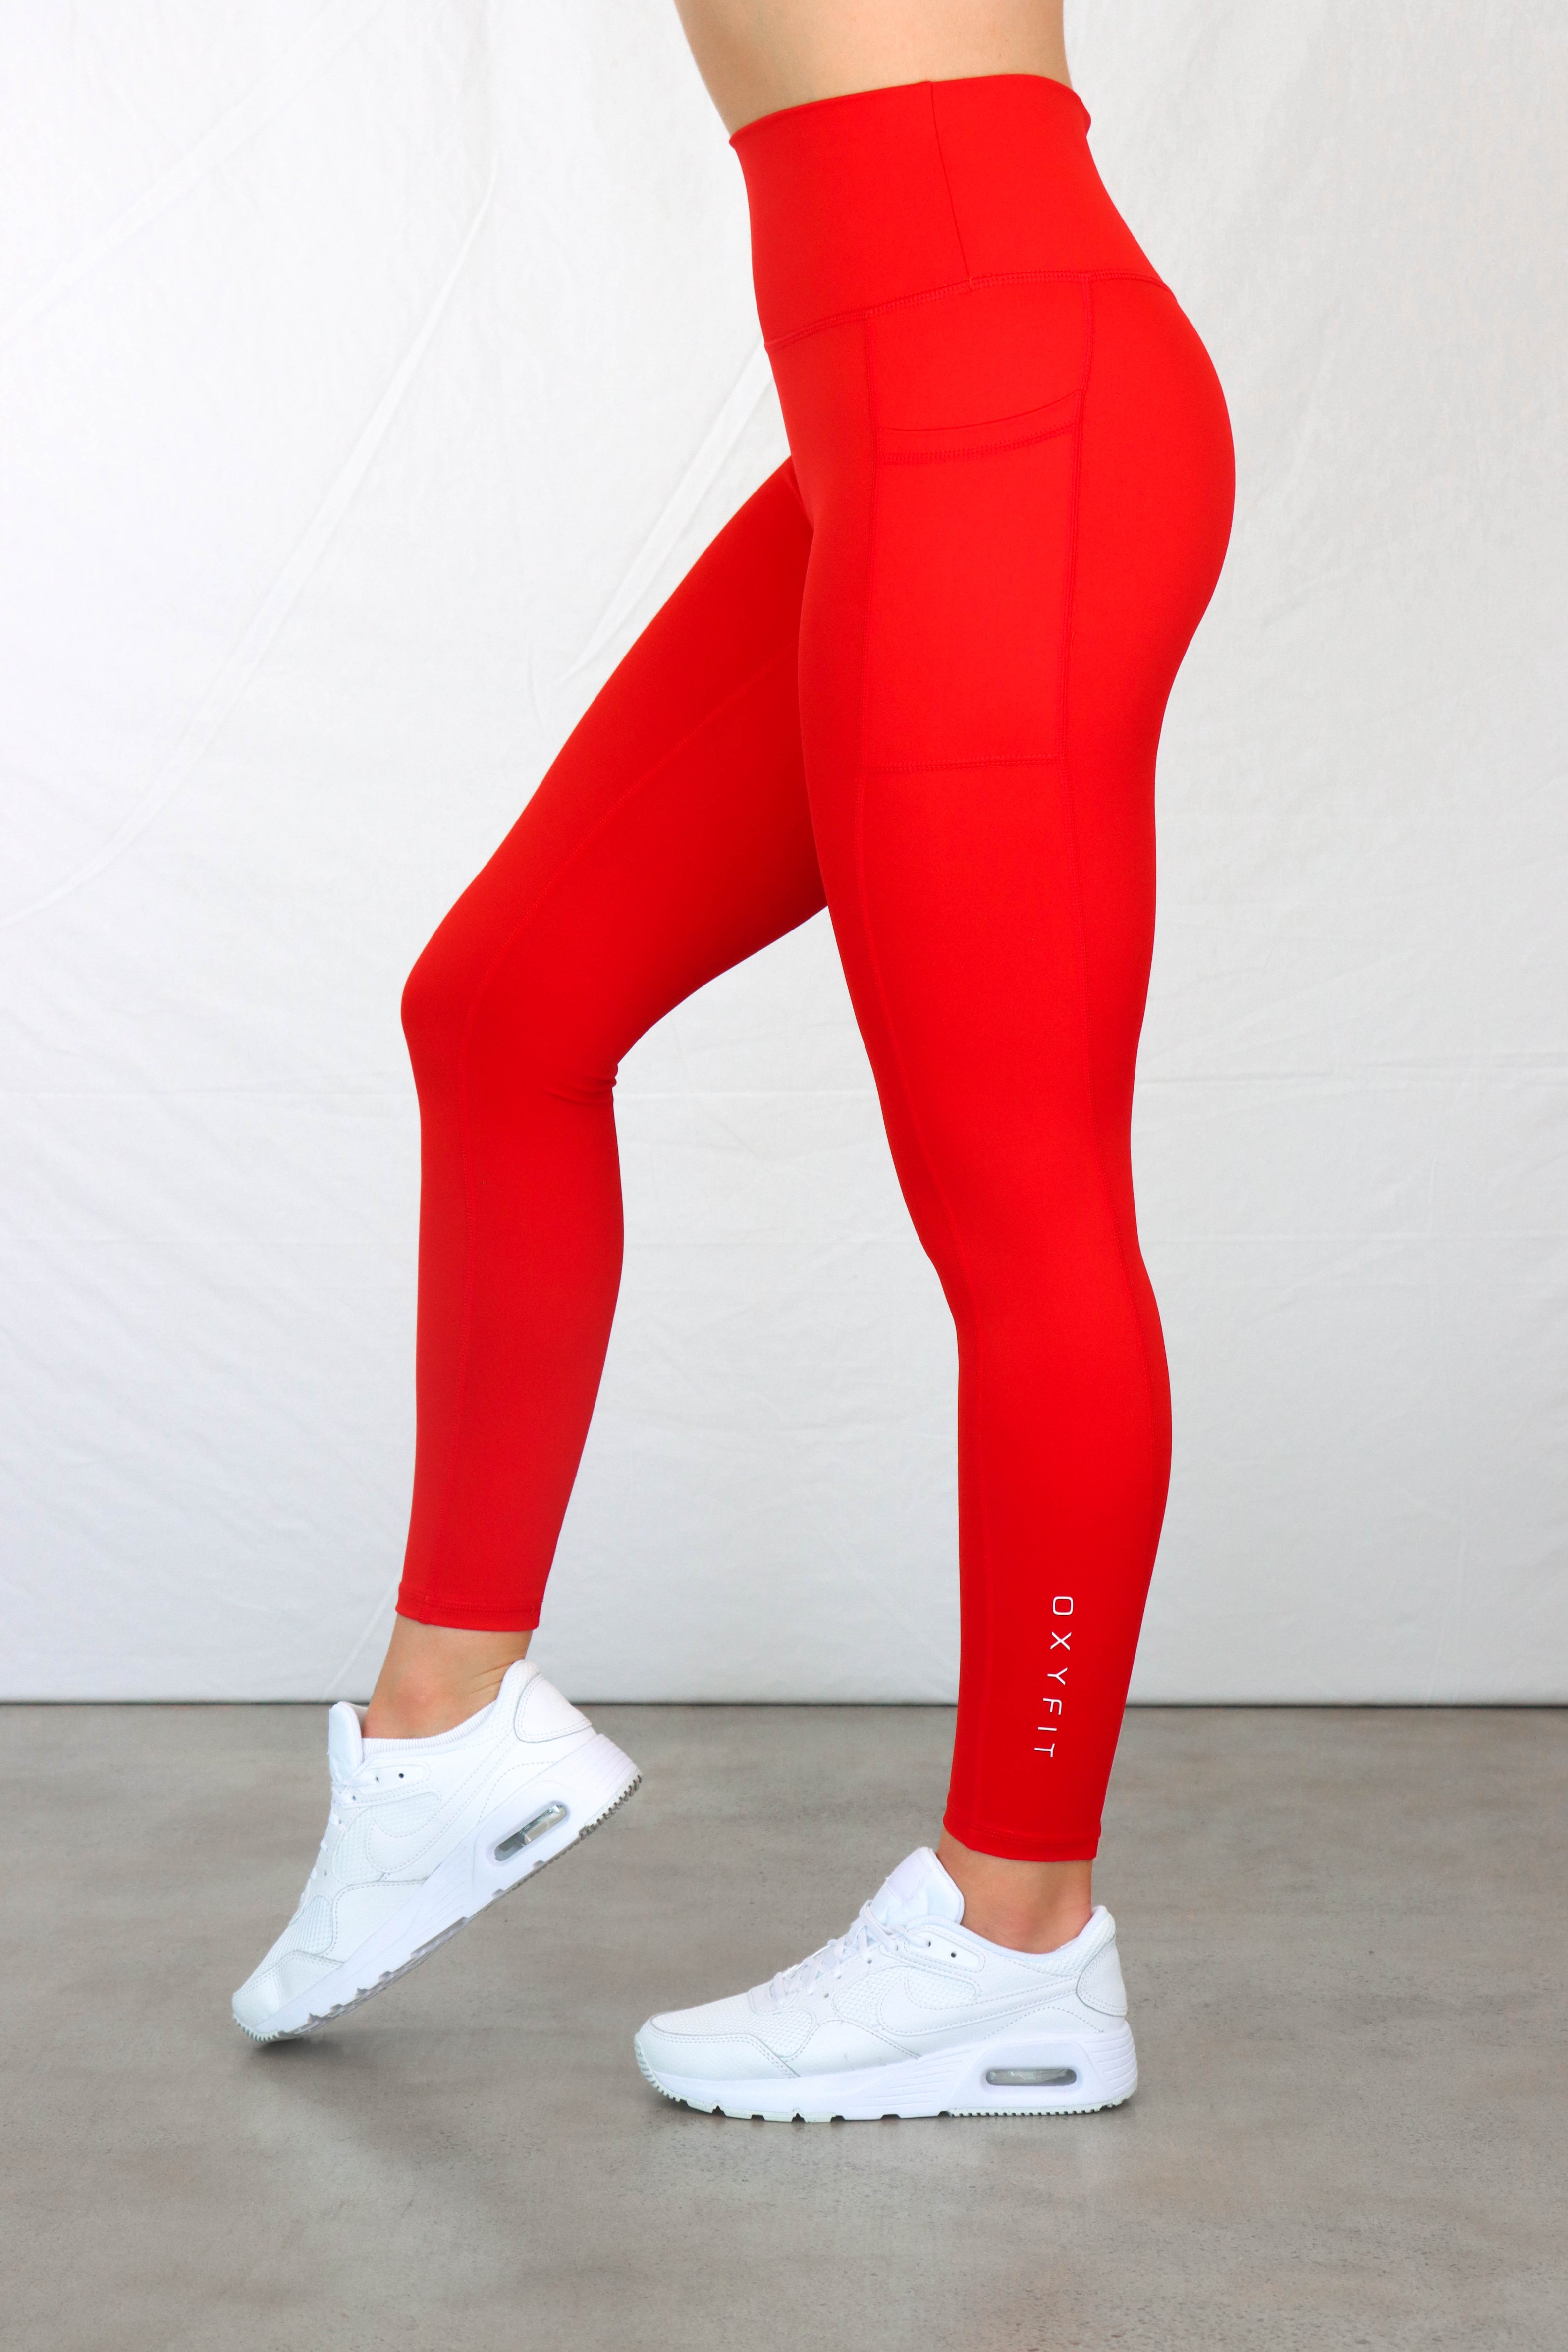 Oxyfit Women's Stealth Leggings, Candy Red